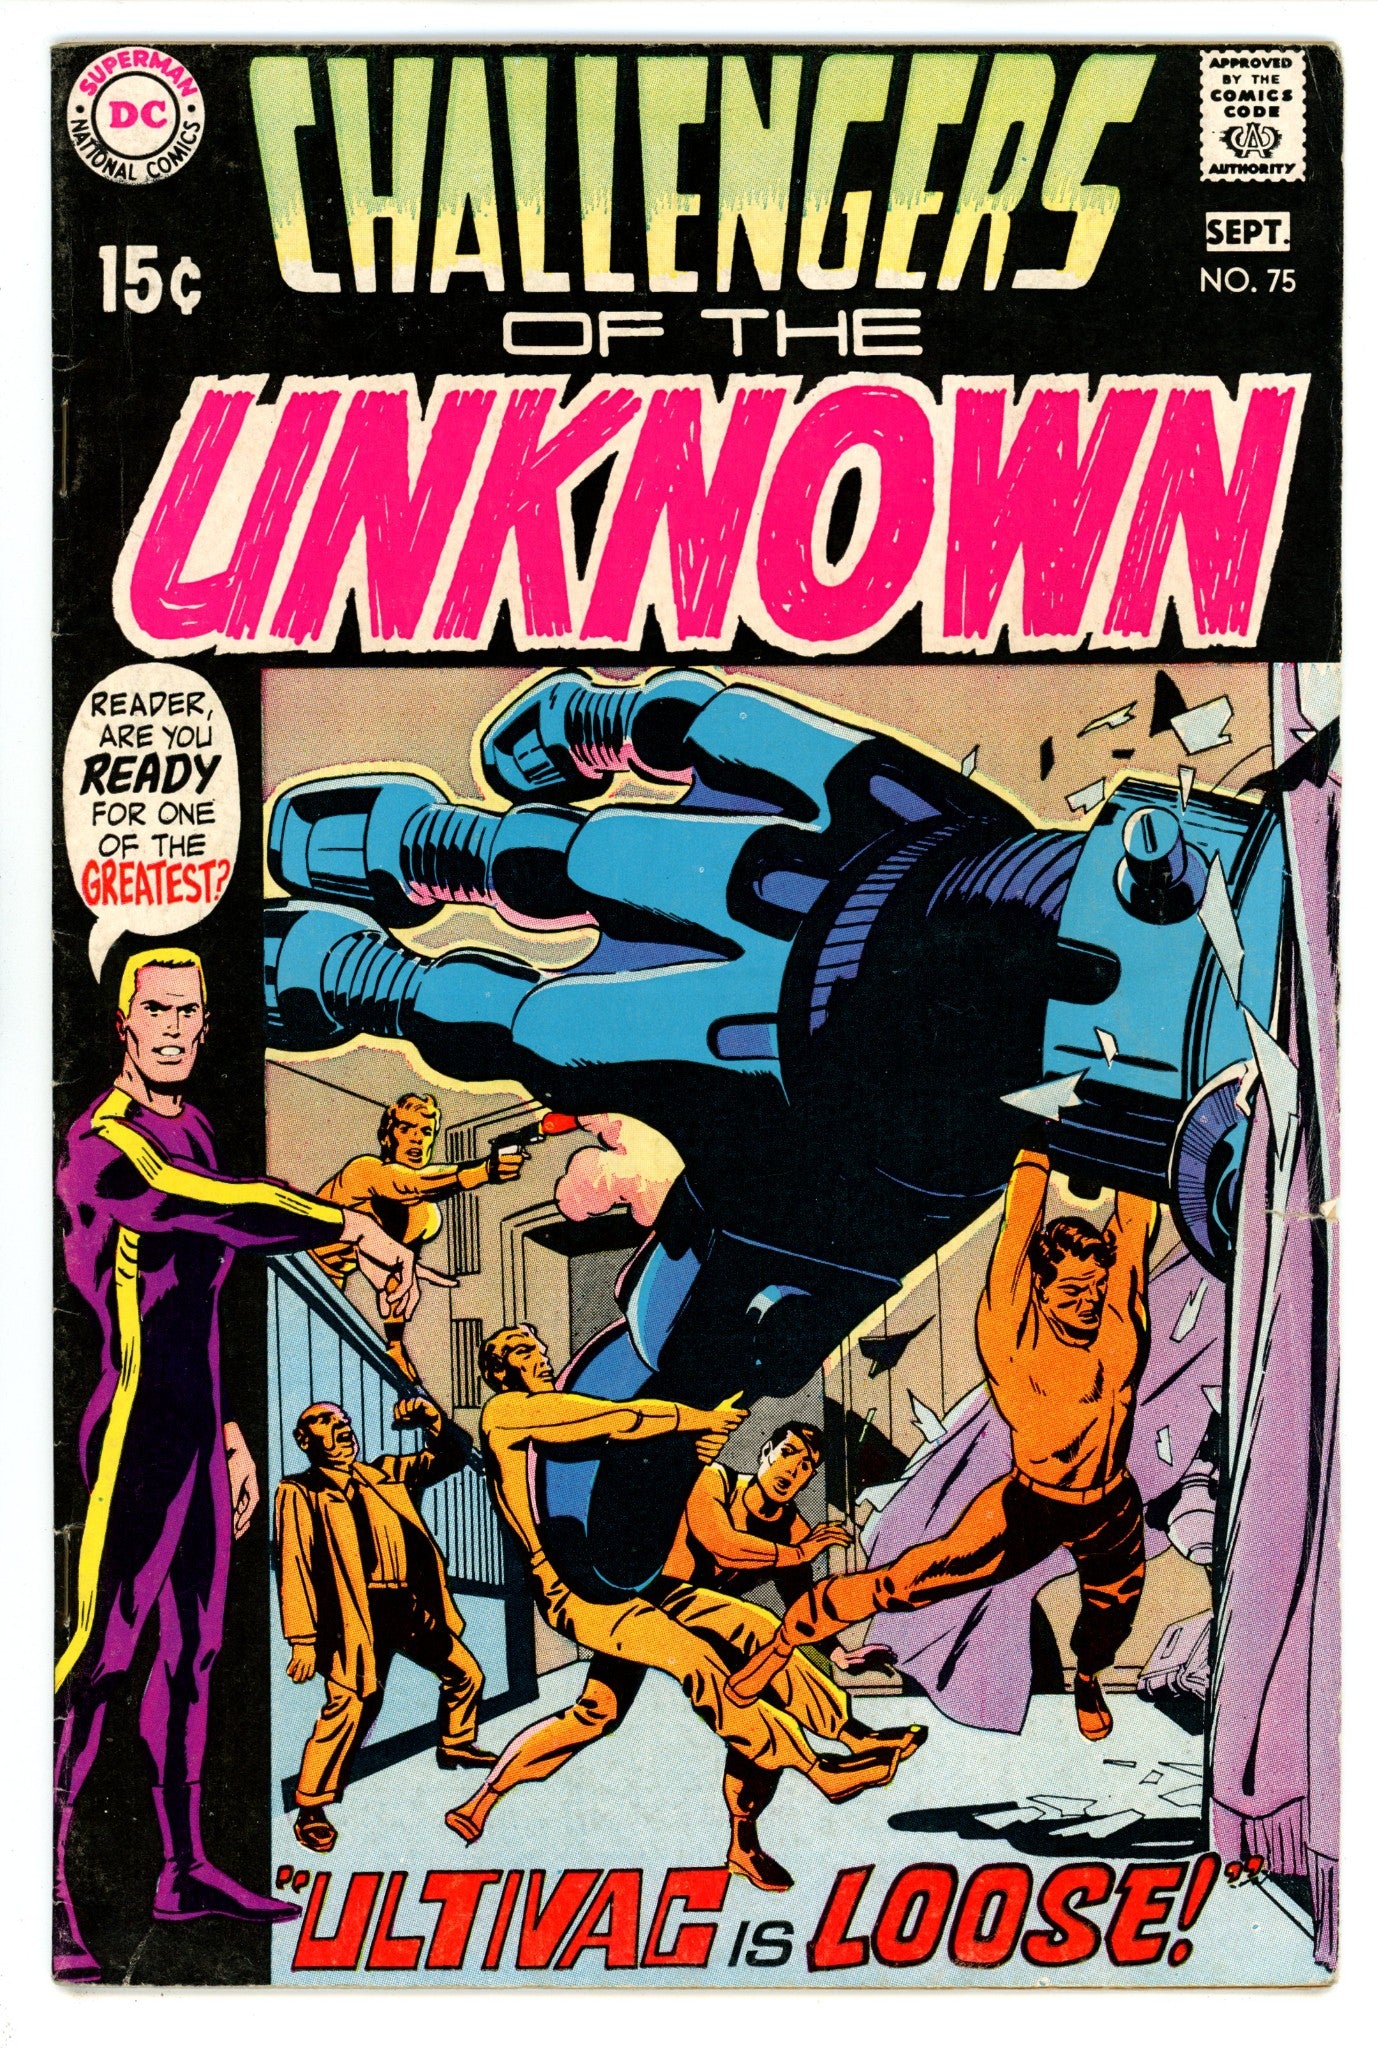 Challengers of the Unknown Vol 1 75 FN- (5.5) (1970) 